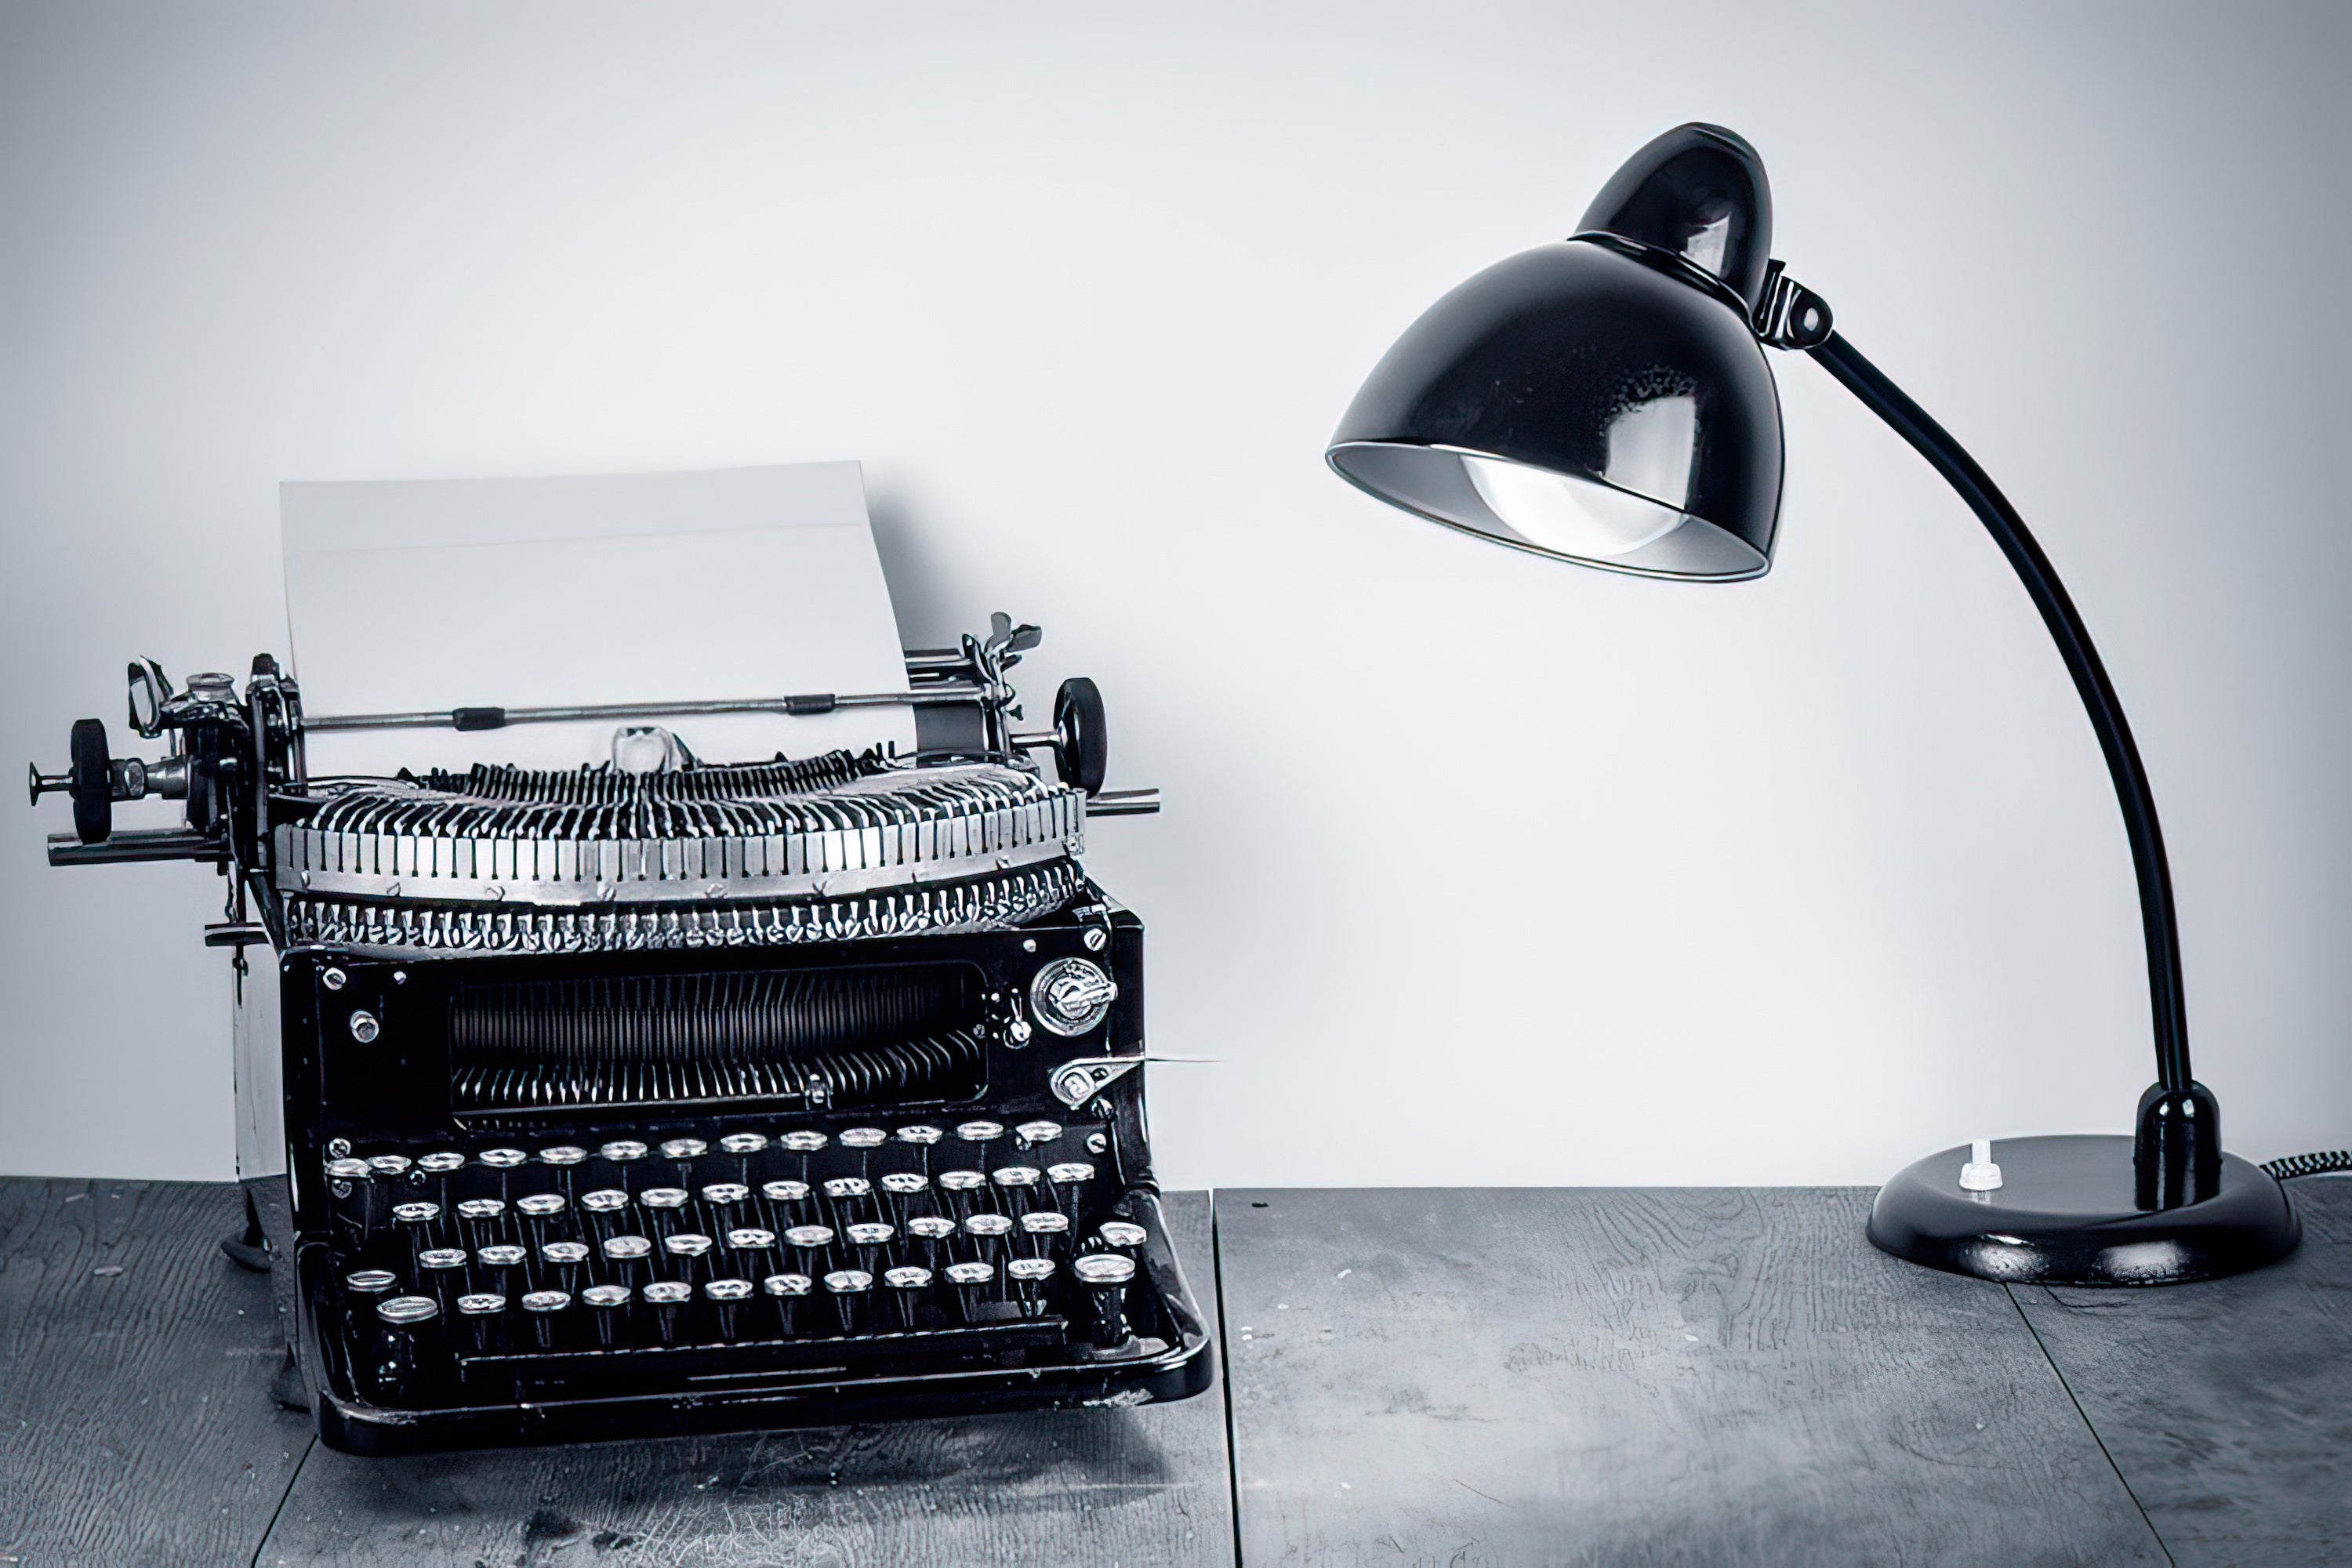 Prewriting Your Screenplay: A Step-by-Step Guide to Generating Stories - Book Review - Image of Typewriter and Desk Lamp